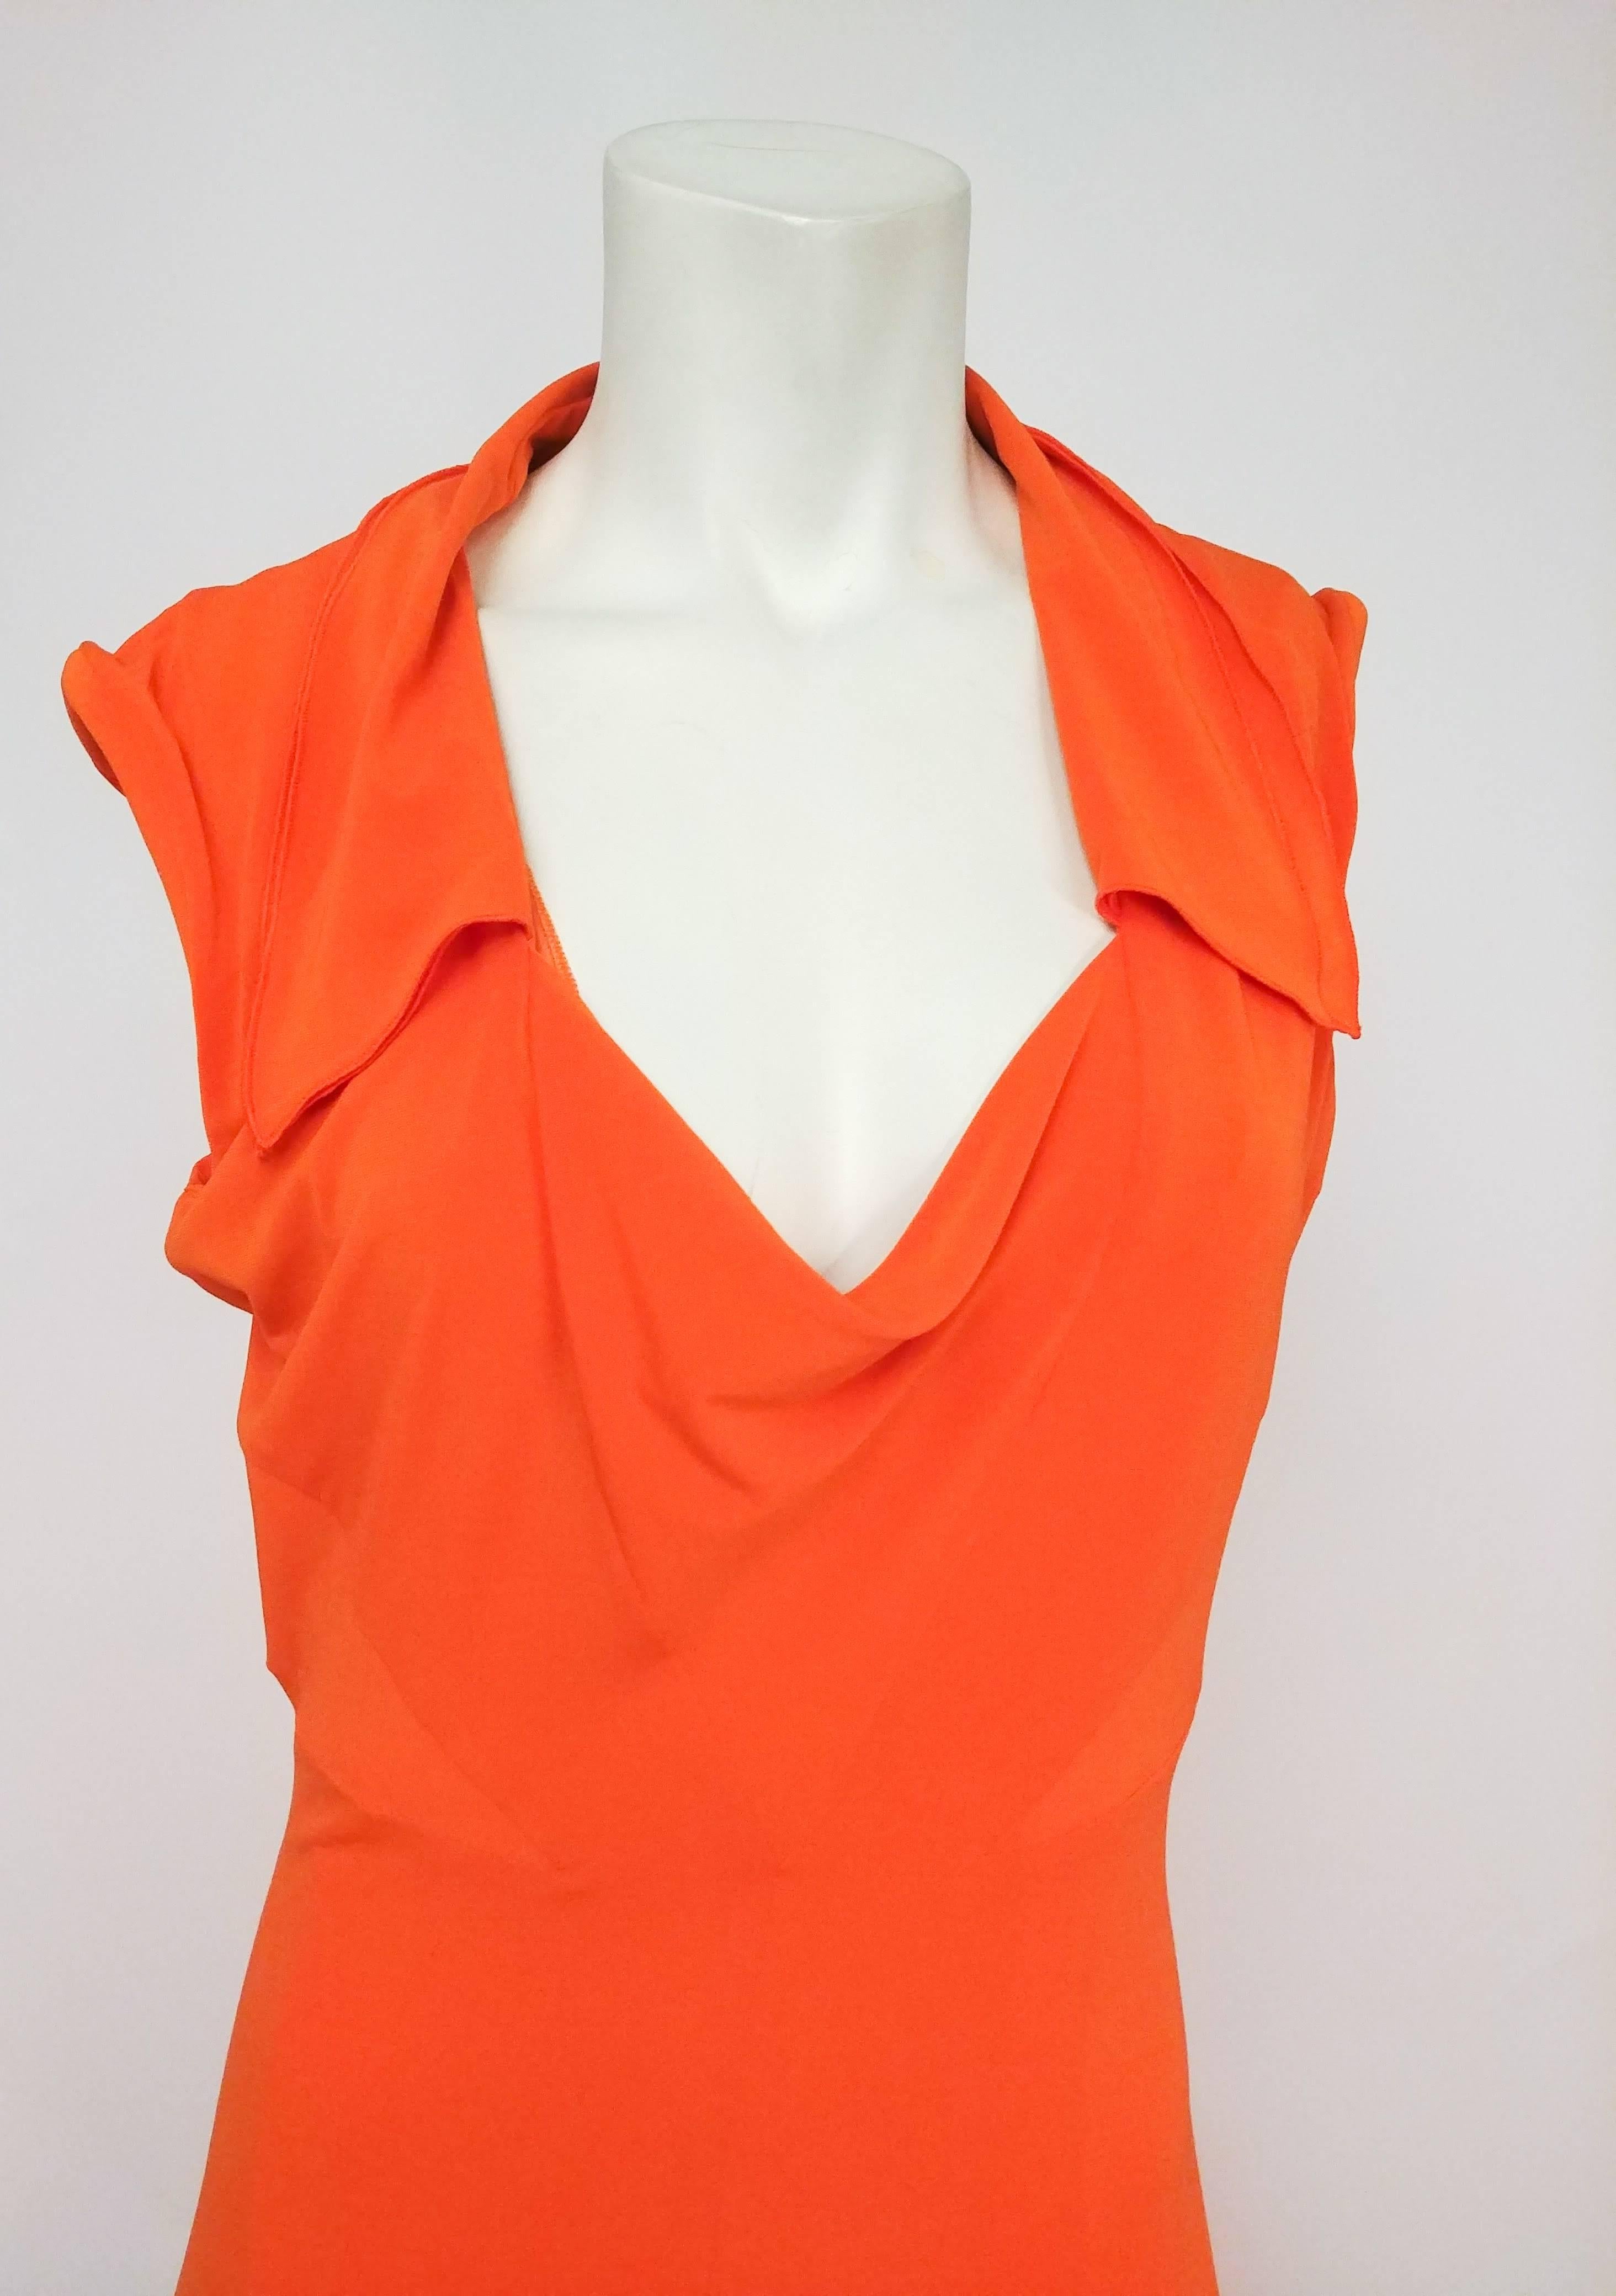 Karl Lagerfeld Orange Jersey Cowl Neck Dress. Fully lined. Intricate piecing details for flattering chevrons at skirt & waist. Slightly flared skirt. 